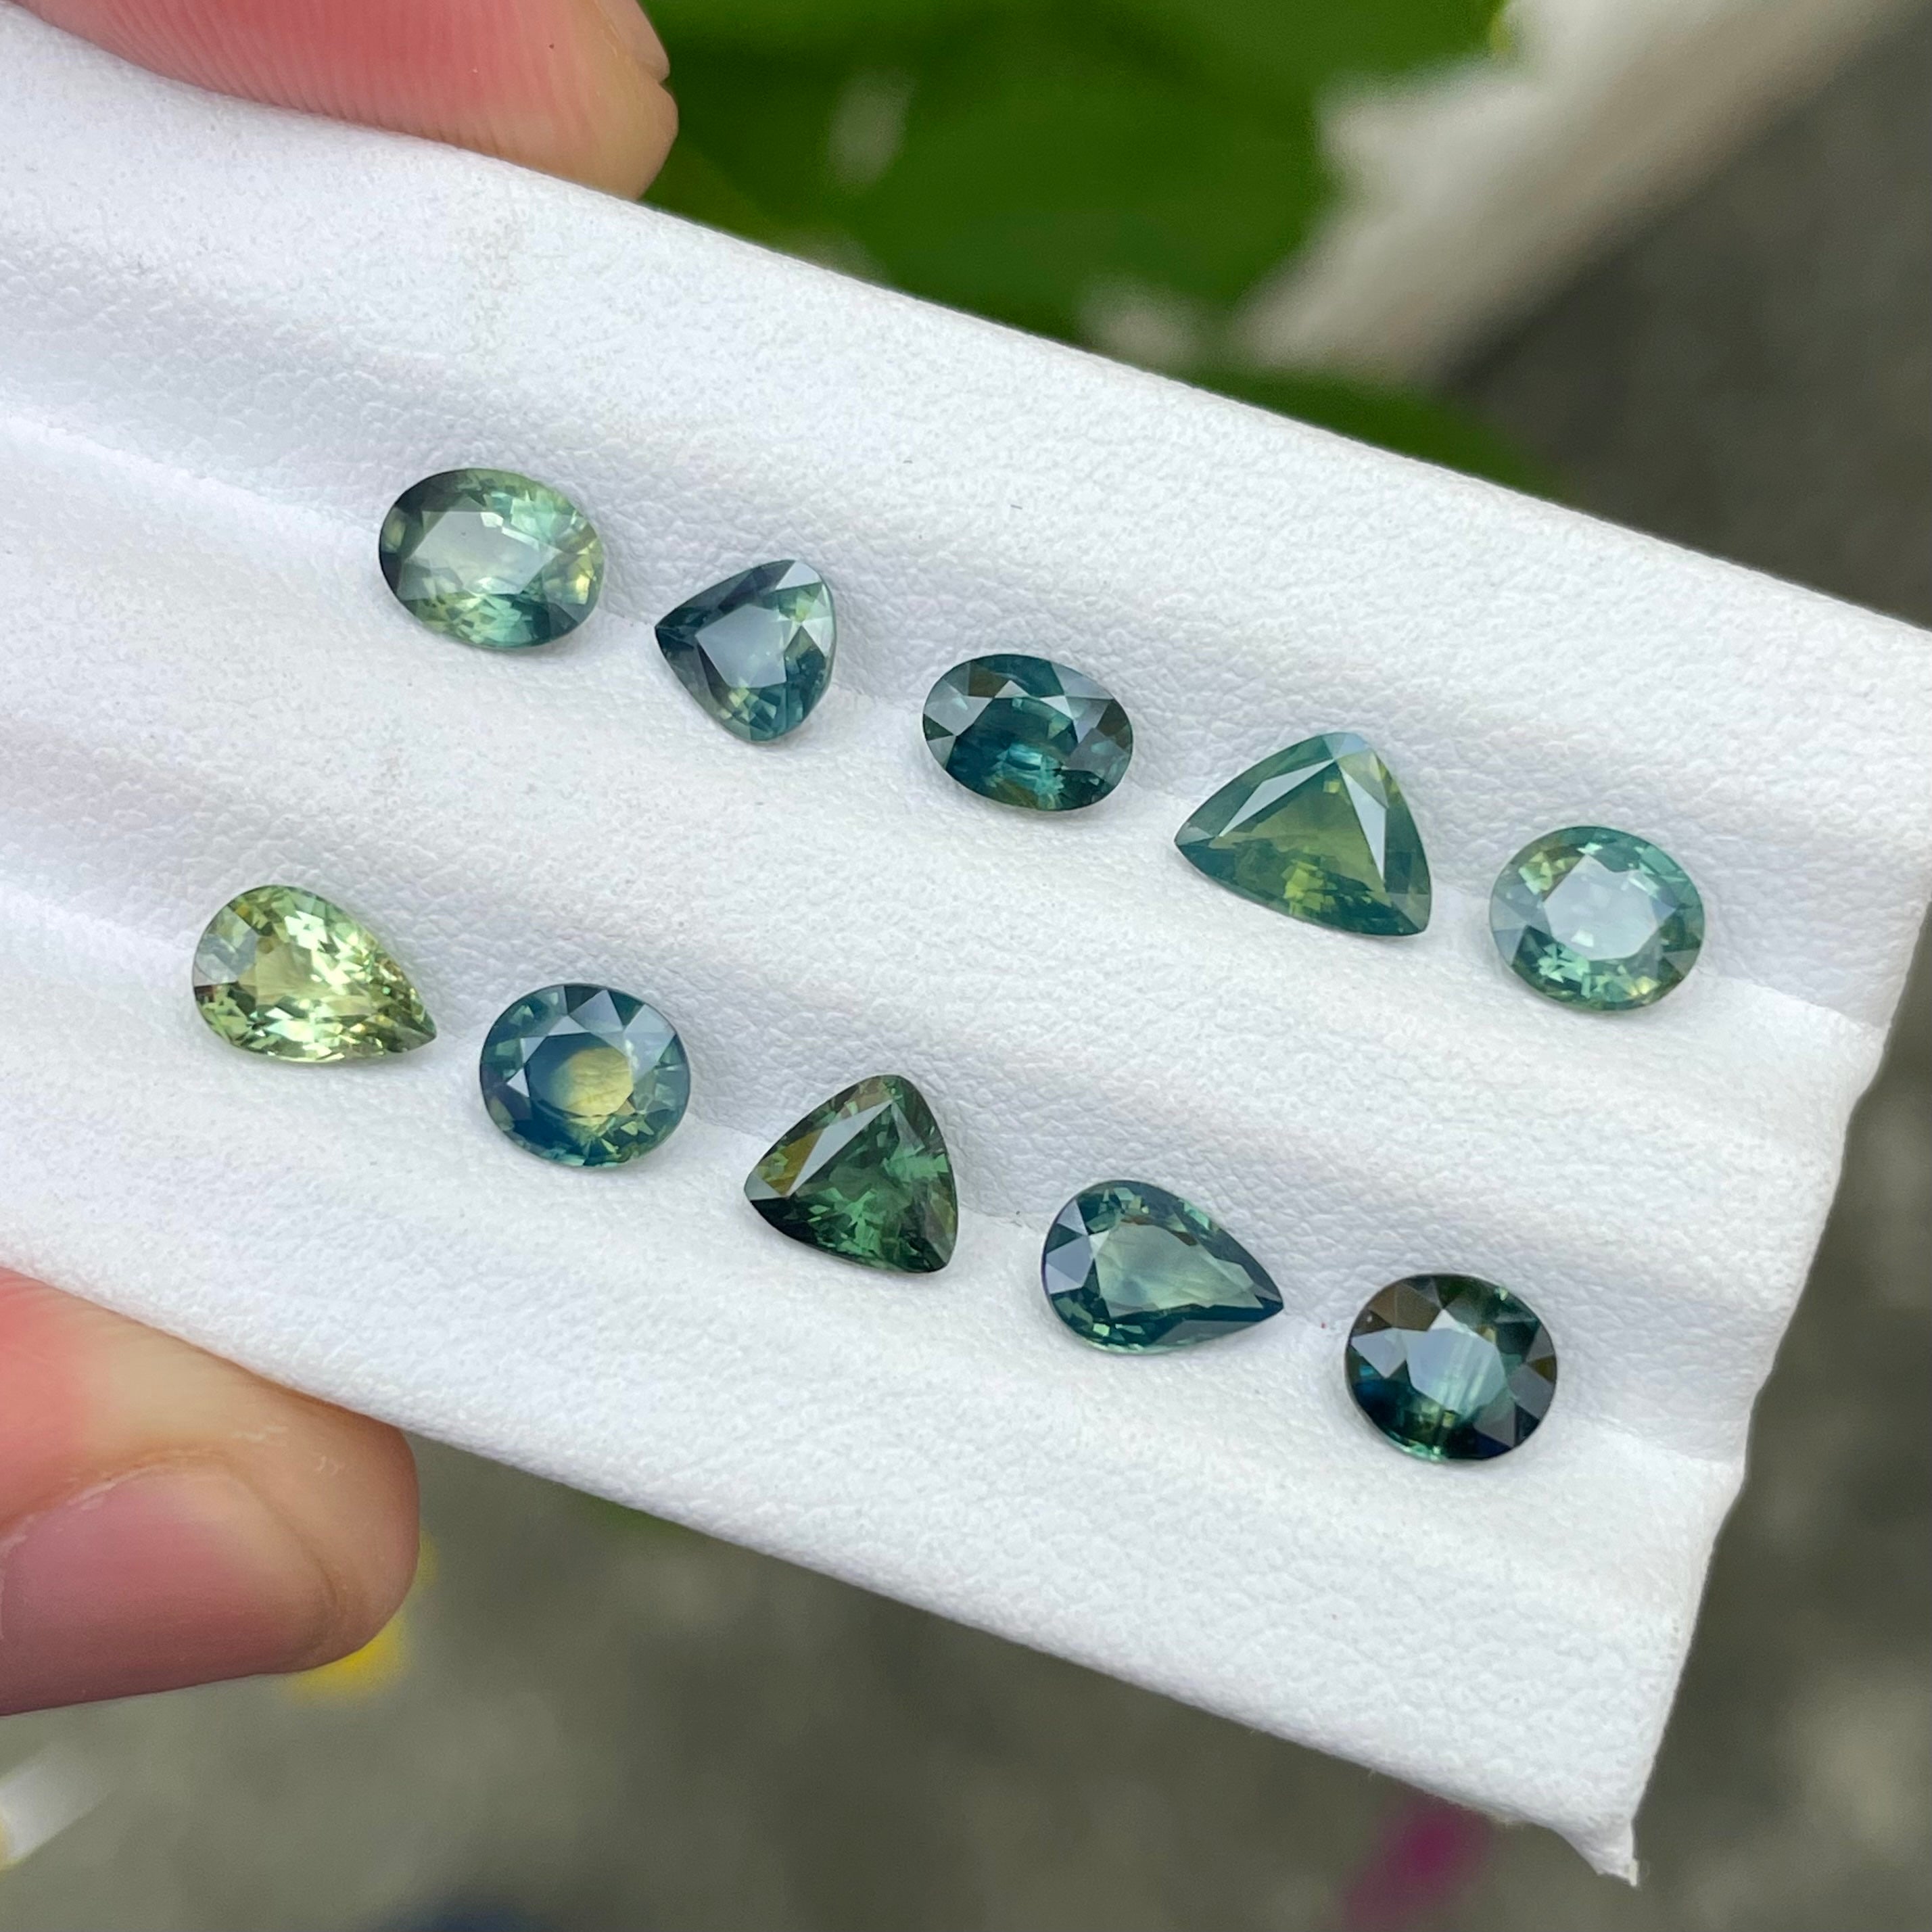 Parti Sapphire 7.30 carats 10 Pieces Natural Gemstones Lot from Madagascar